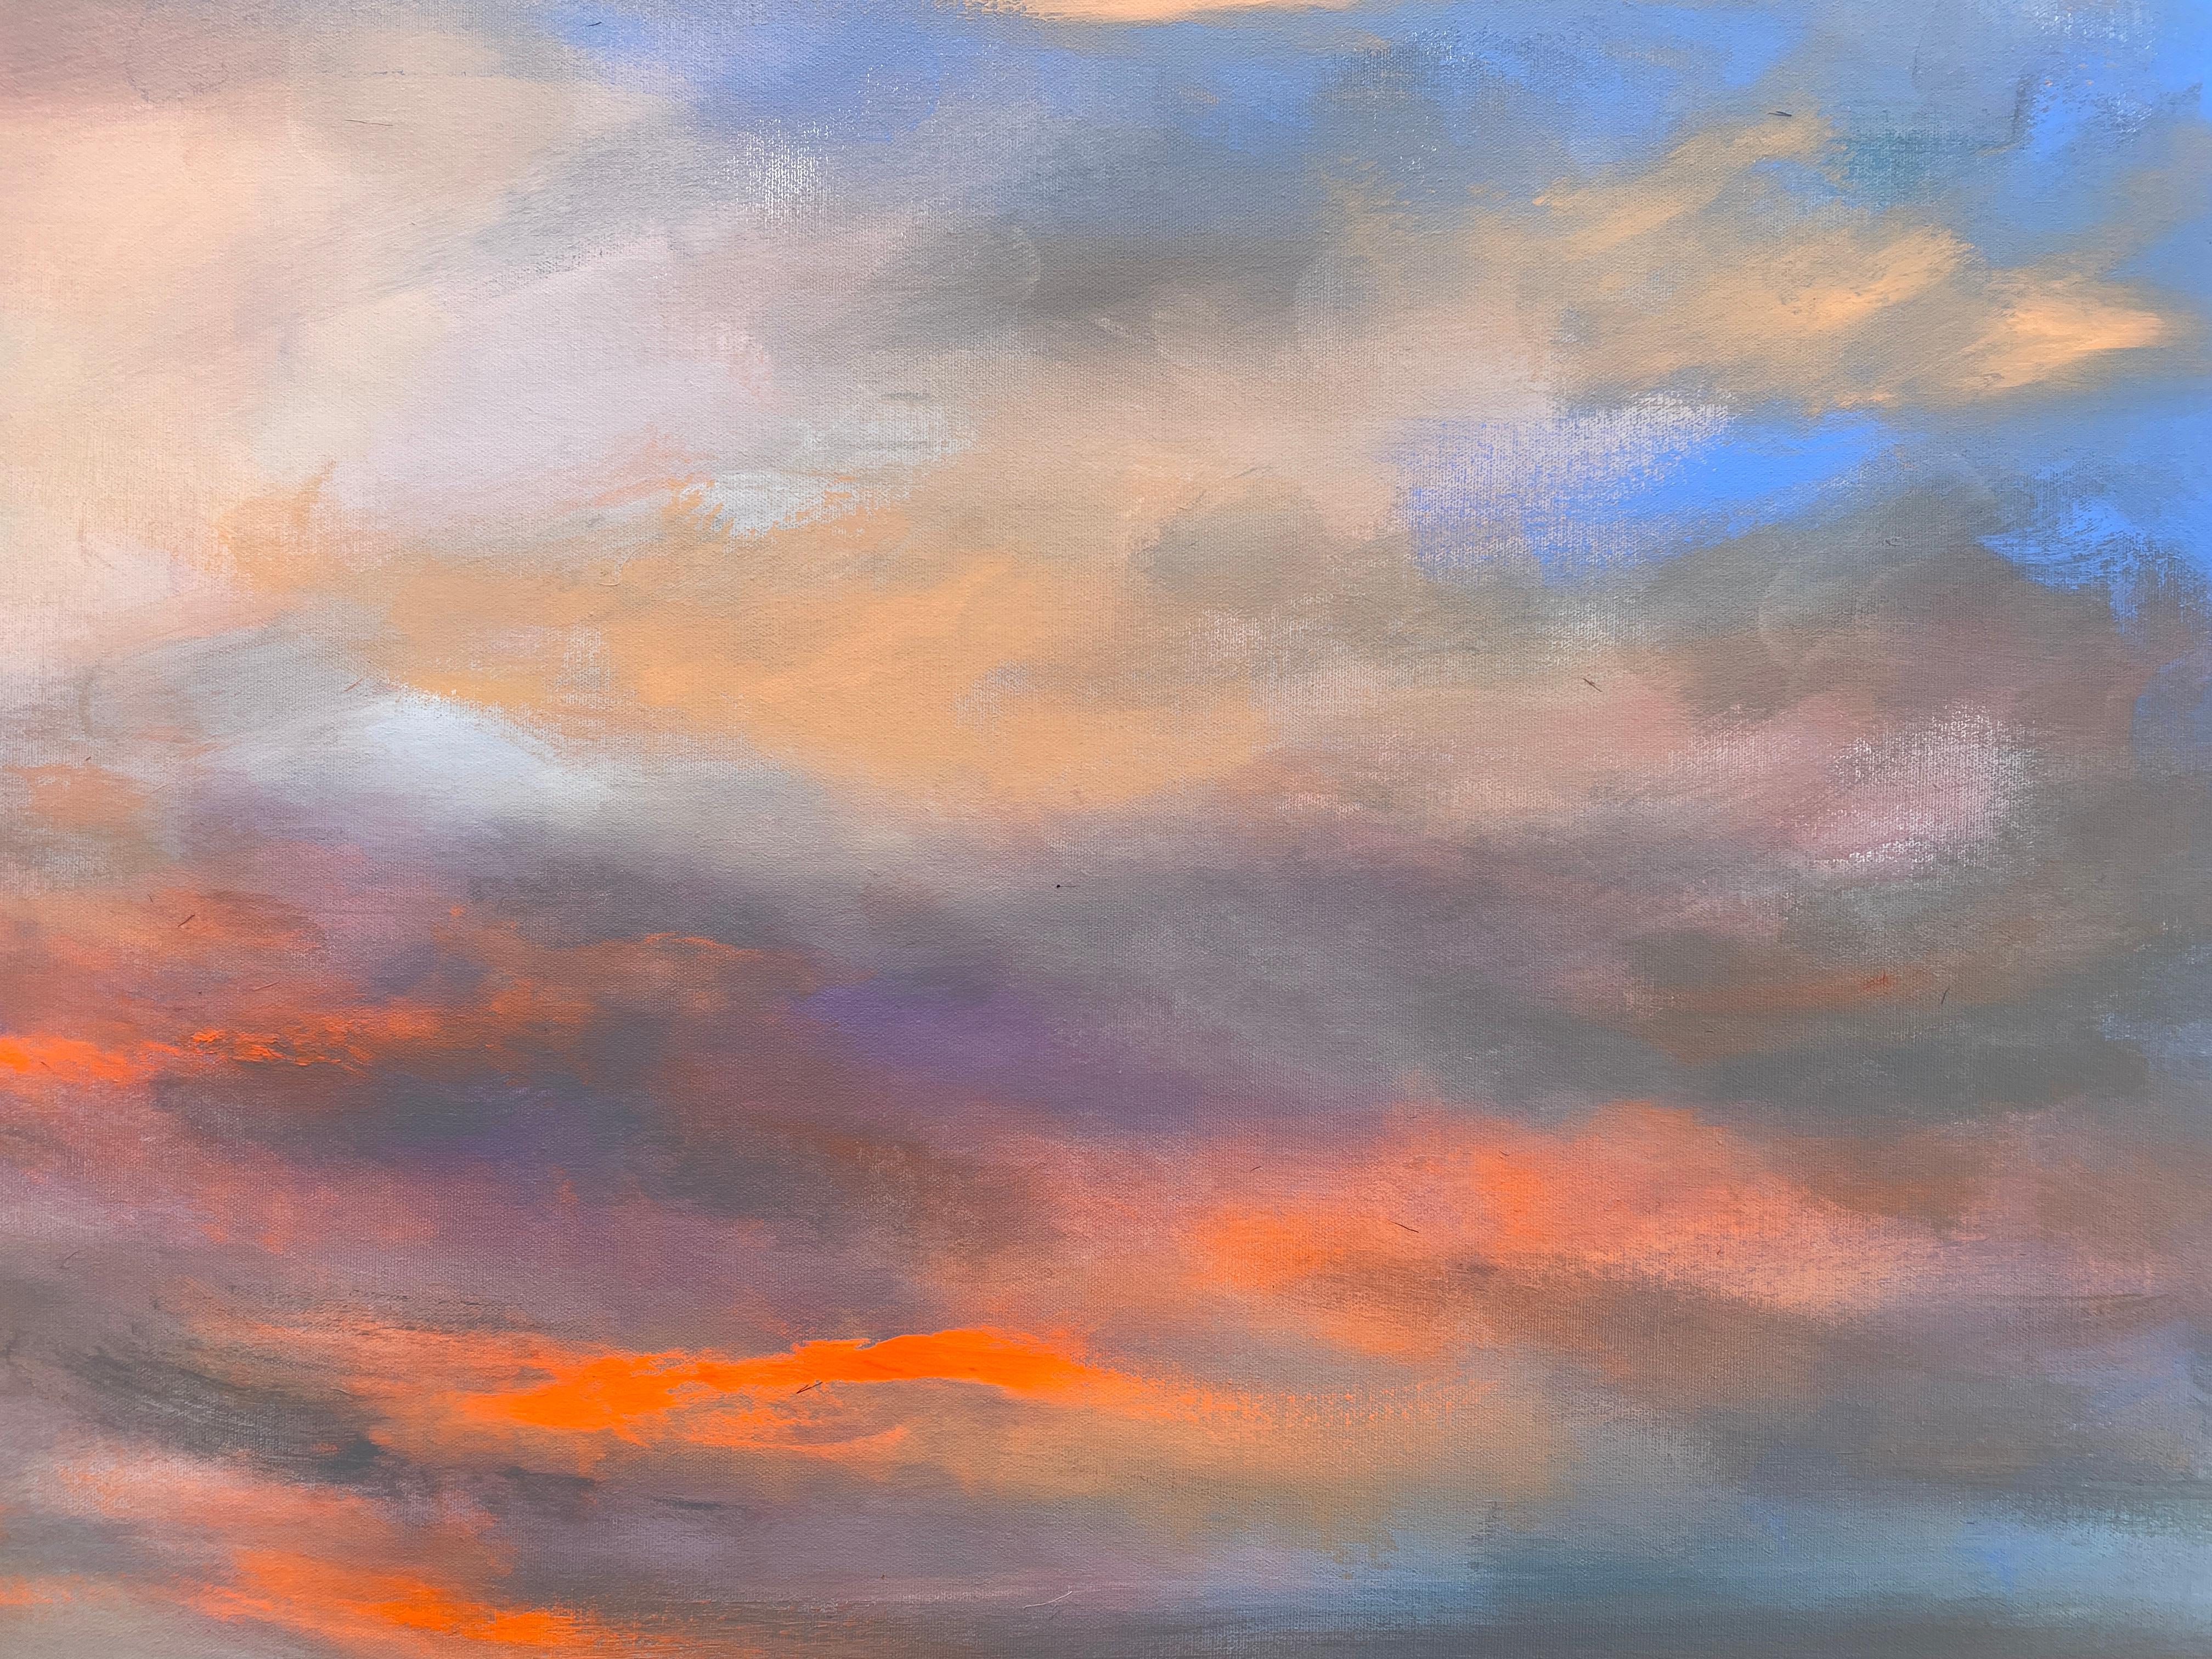 'Silence' - Sunset Over the Ocean - Large Abstract Expressionist Seascape 2